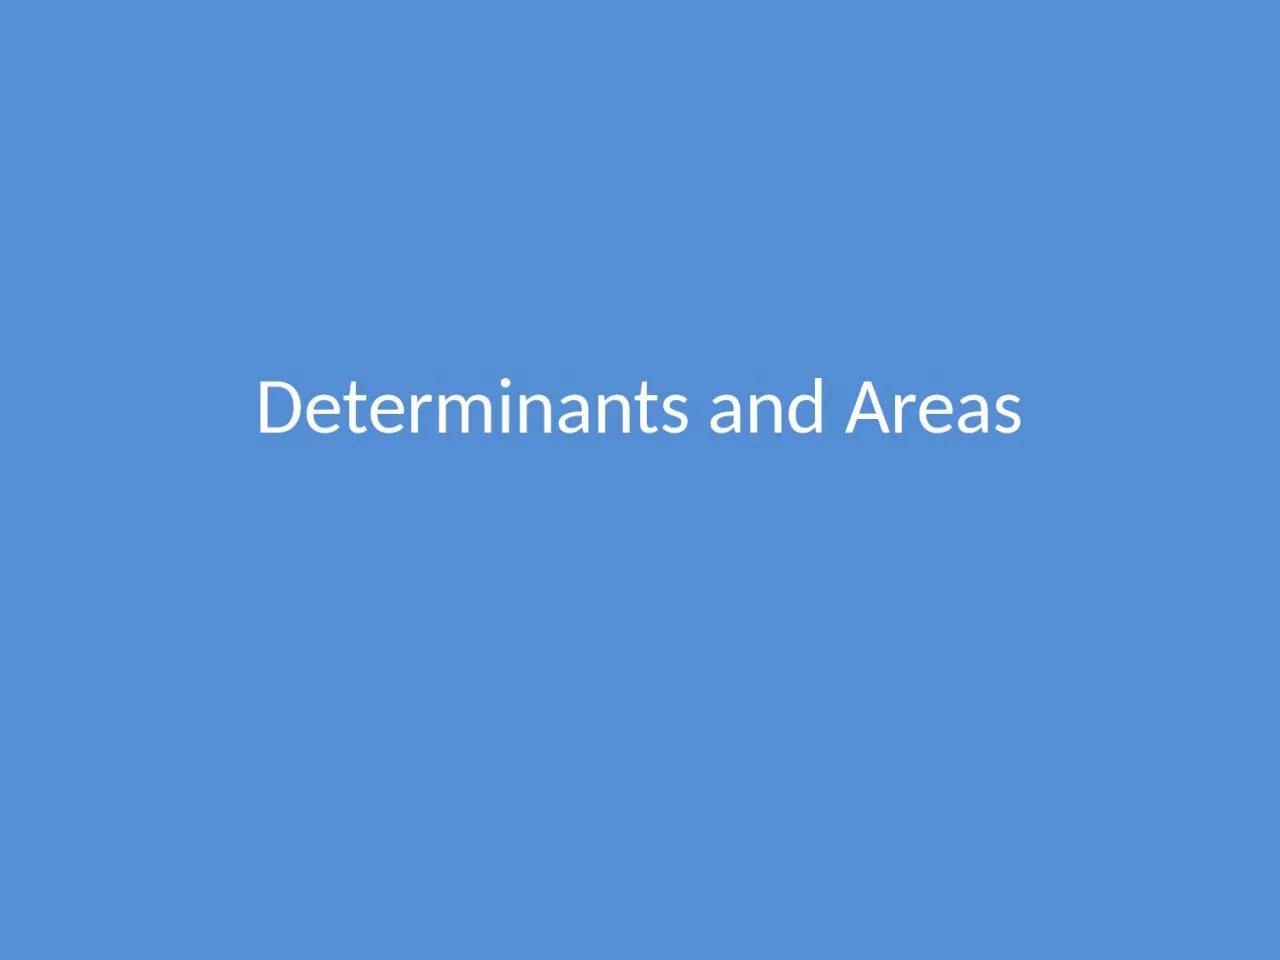 Determinants and Areas The intention here is to prove that application of a 2 x 2 matrix